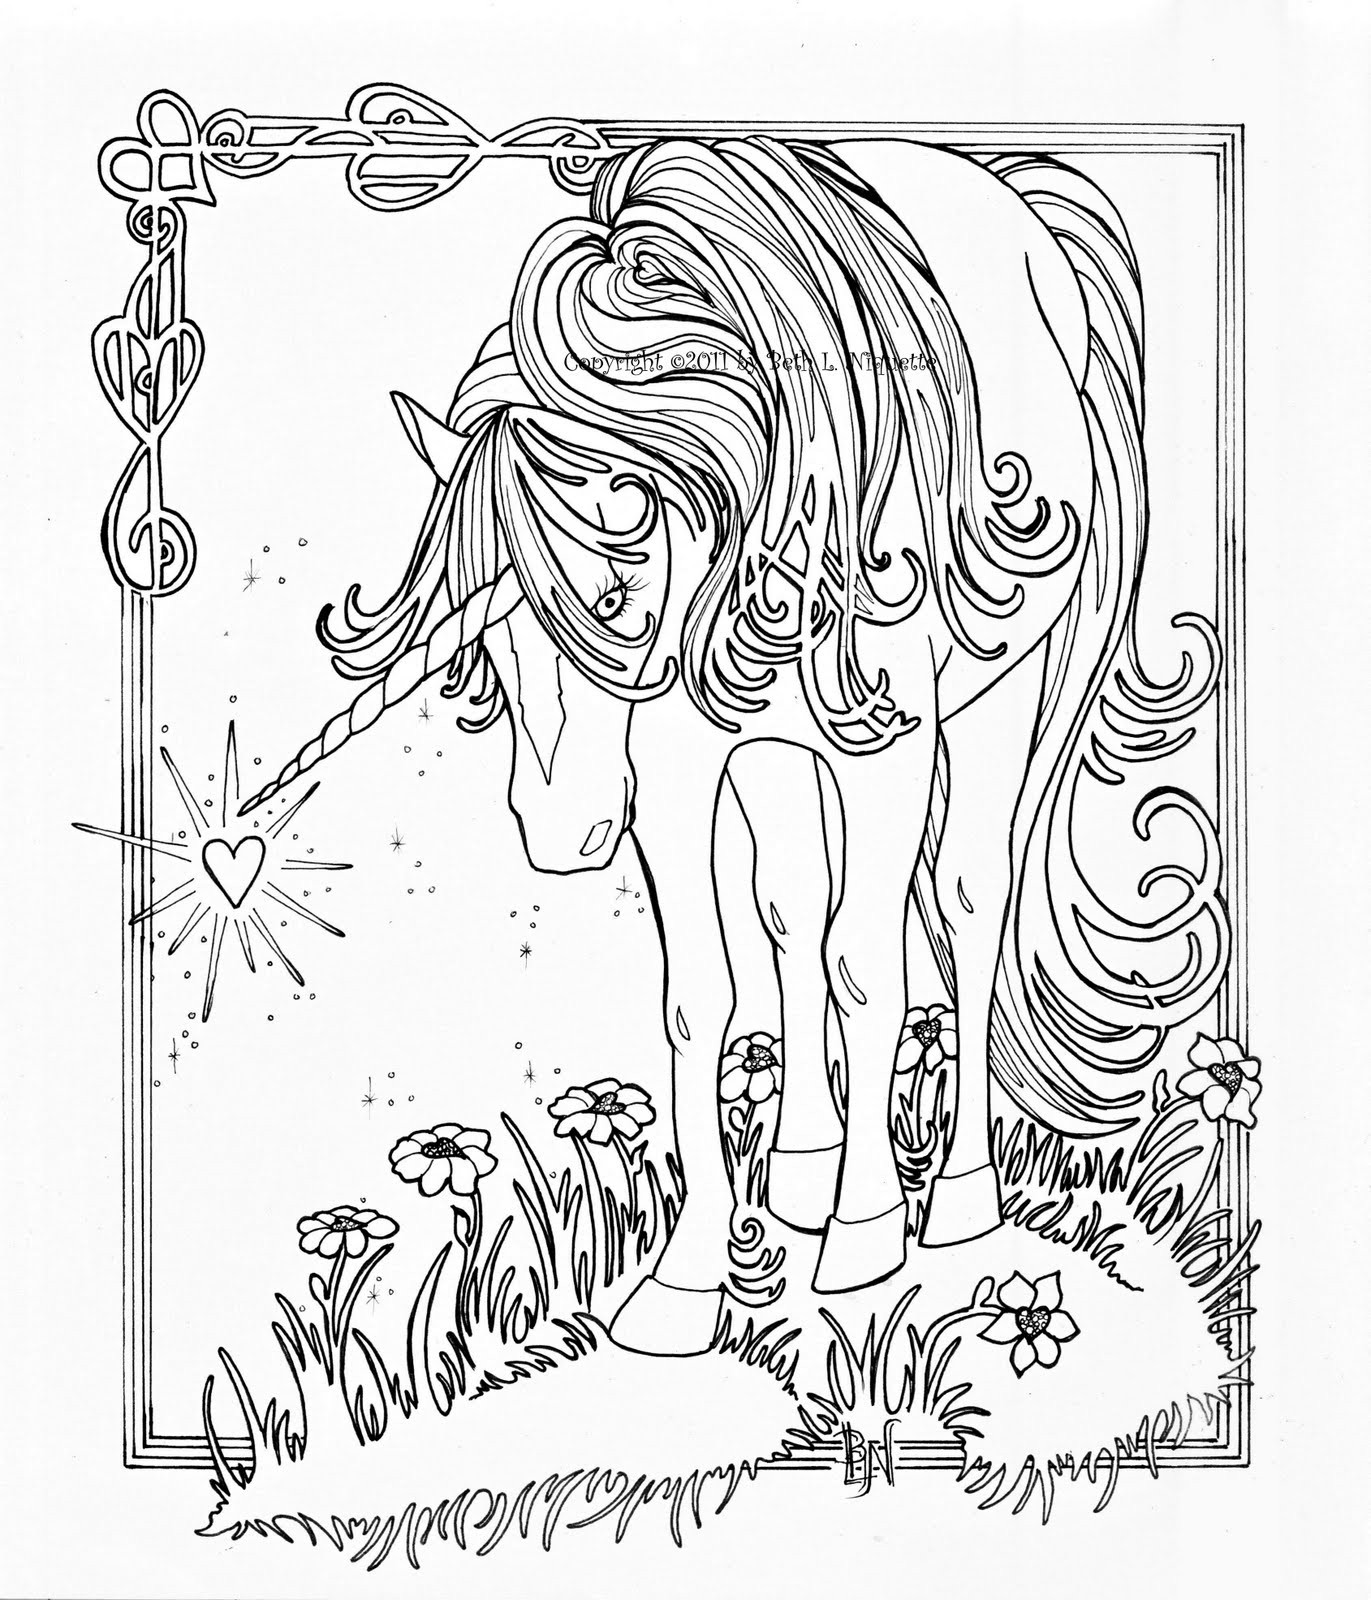 Unicorn Coloring Pages For Adults
 Beth s Artworx August 2011